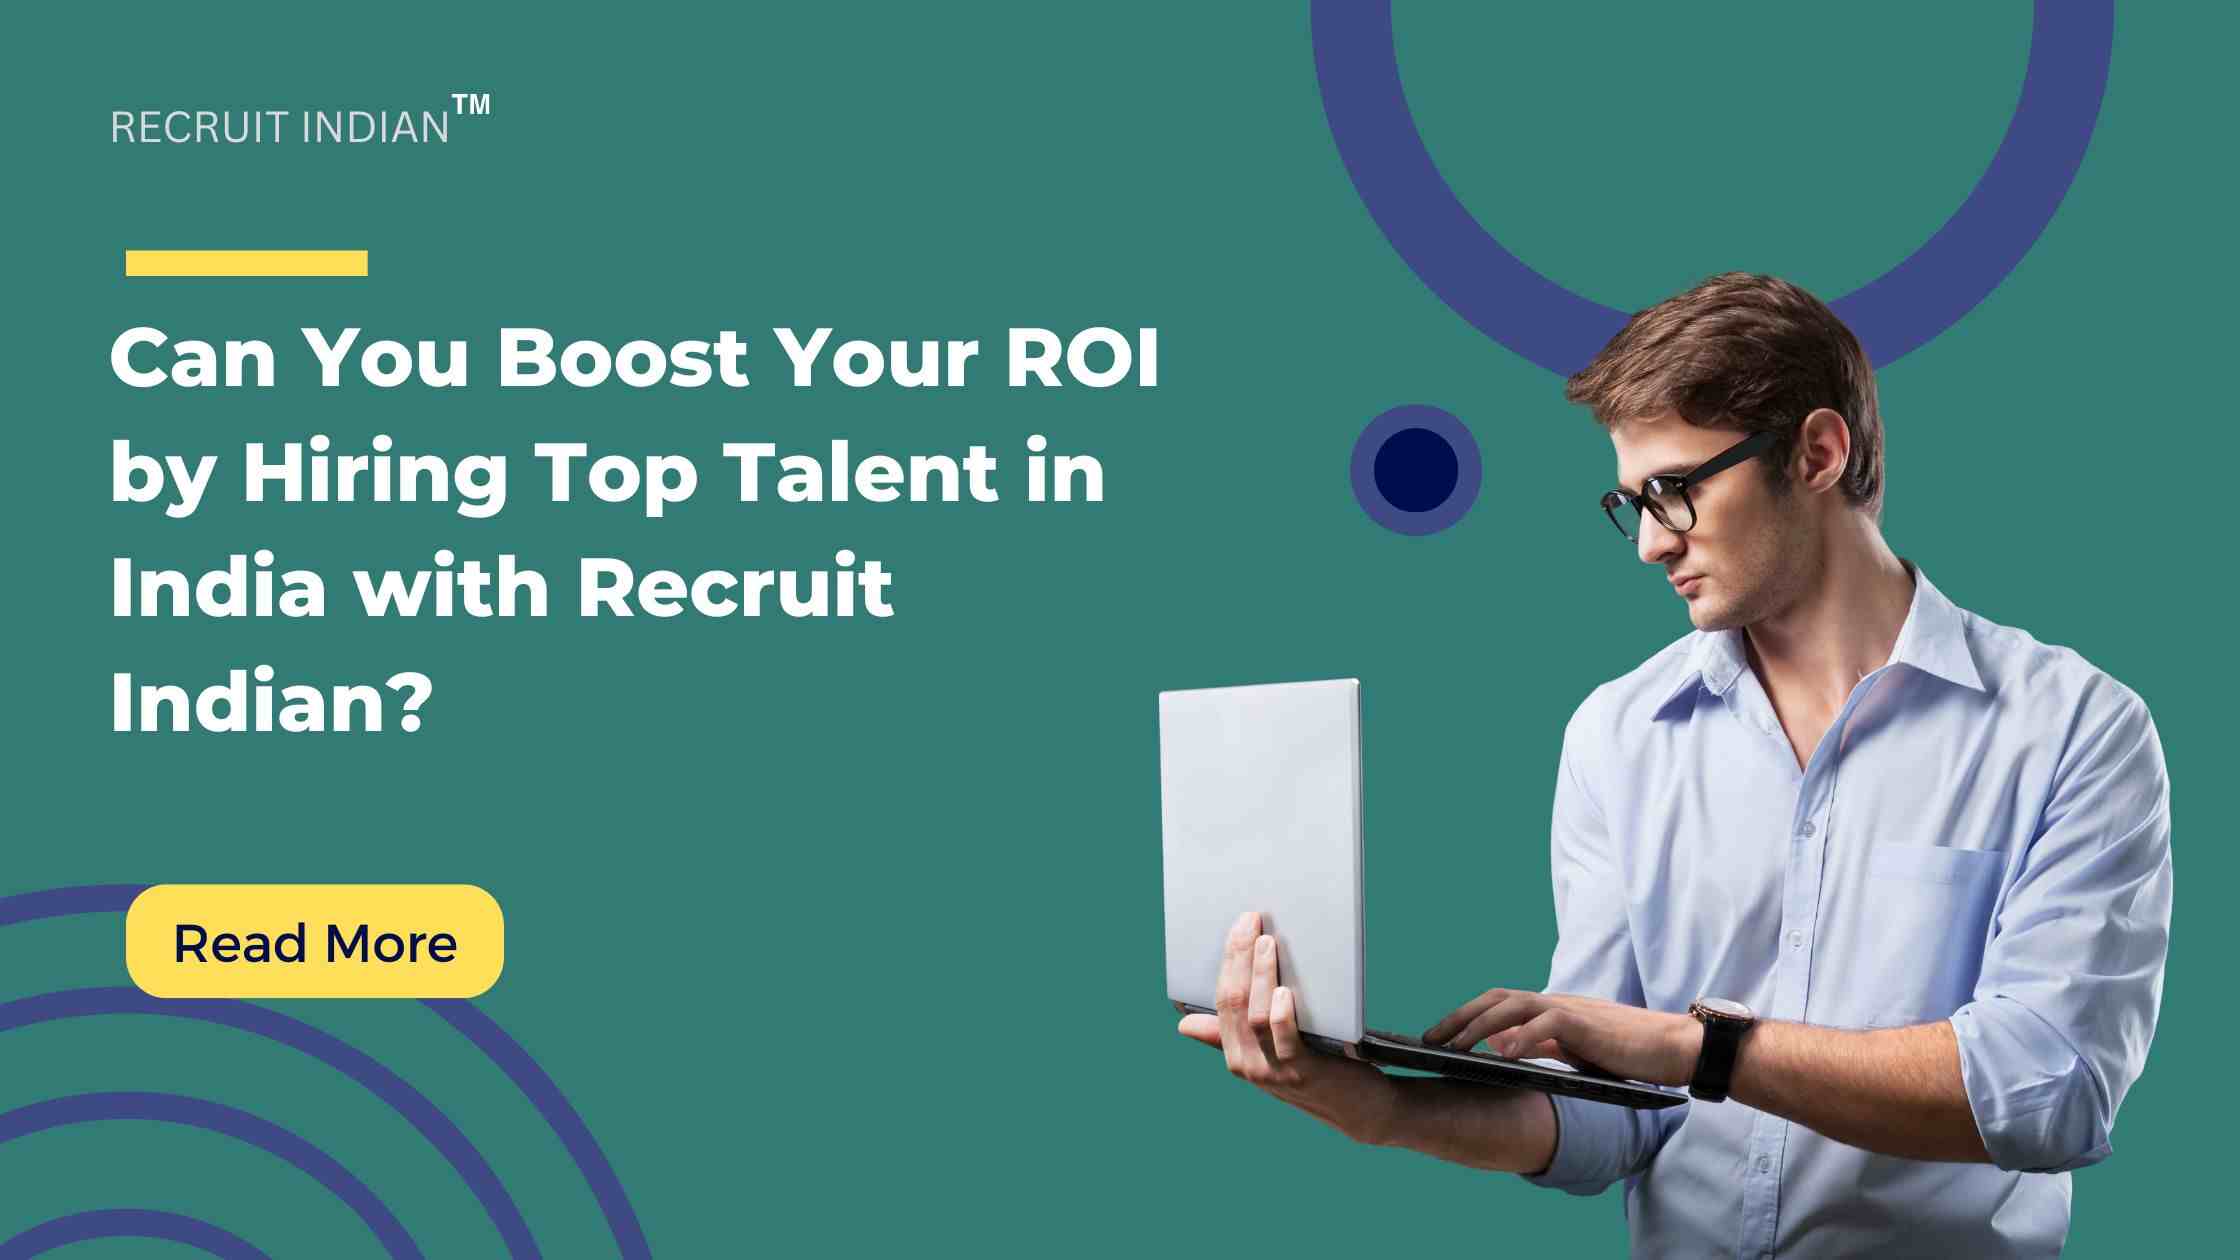 Can You Boost Your ROI by Hiring Top Talent in India with Recruit Indian?